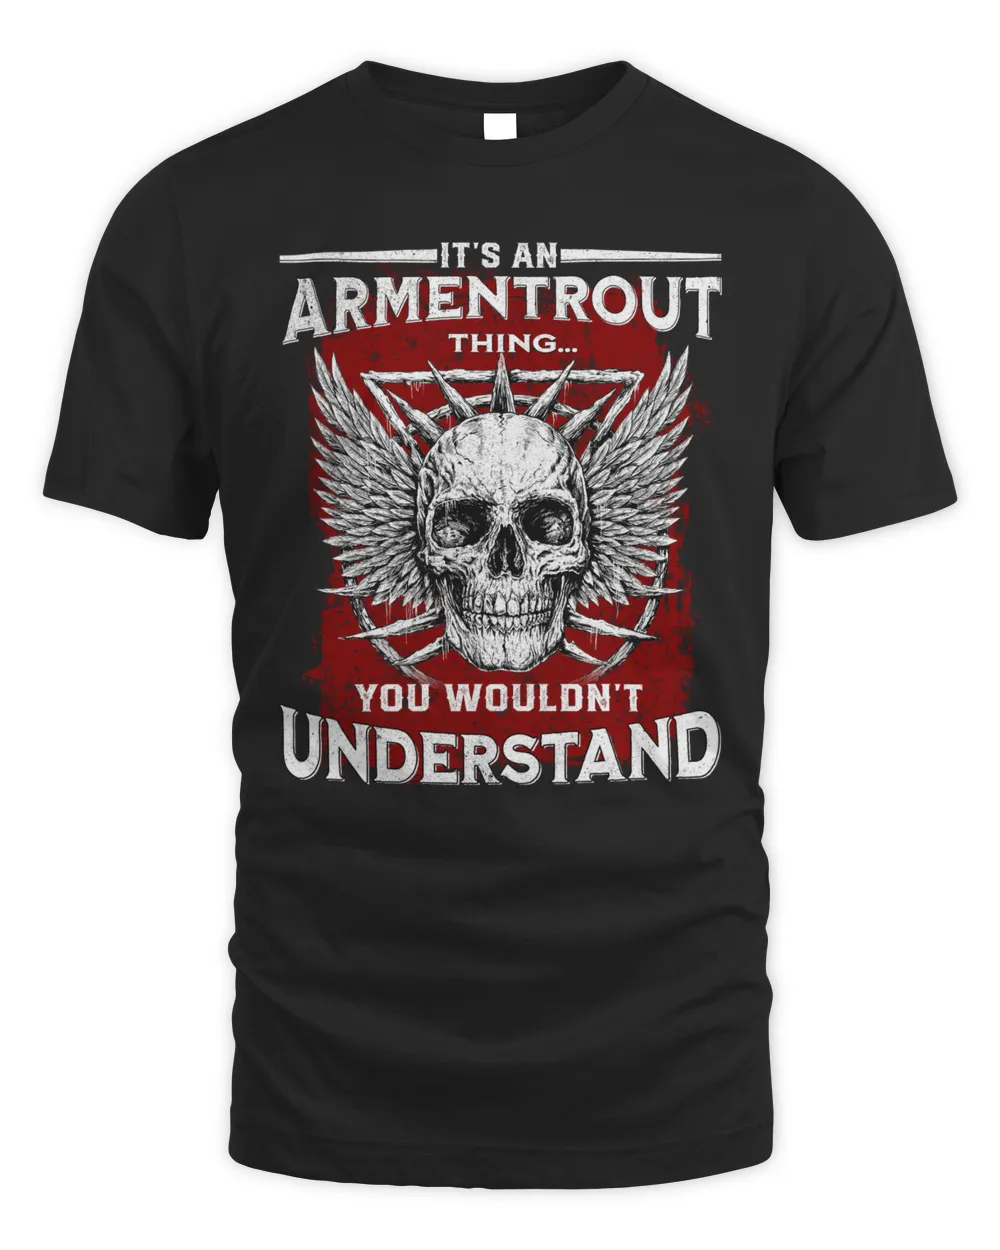 ARMENTROUT-NT-99-01